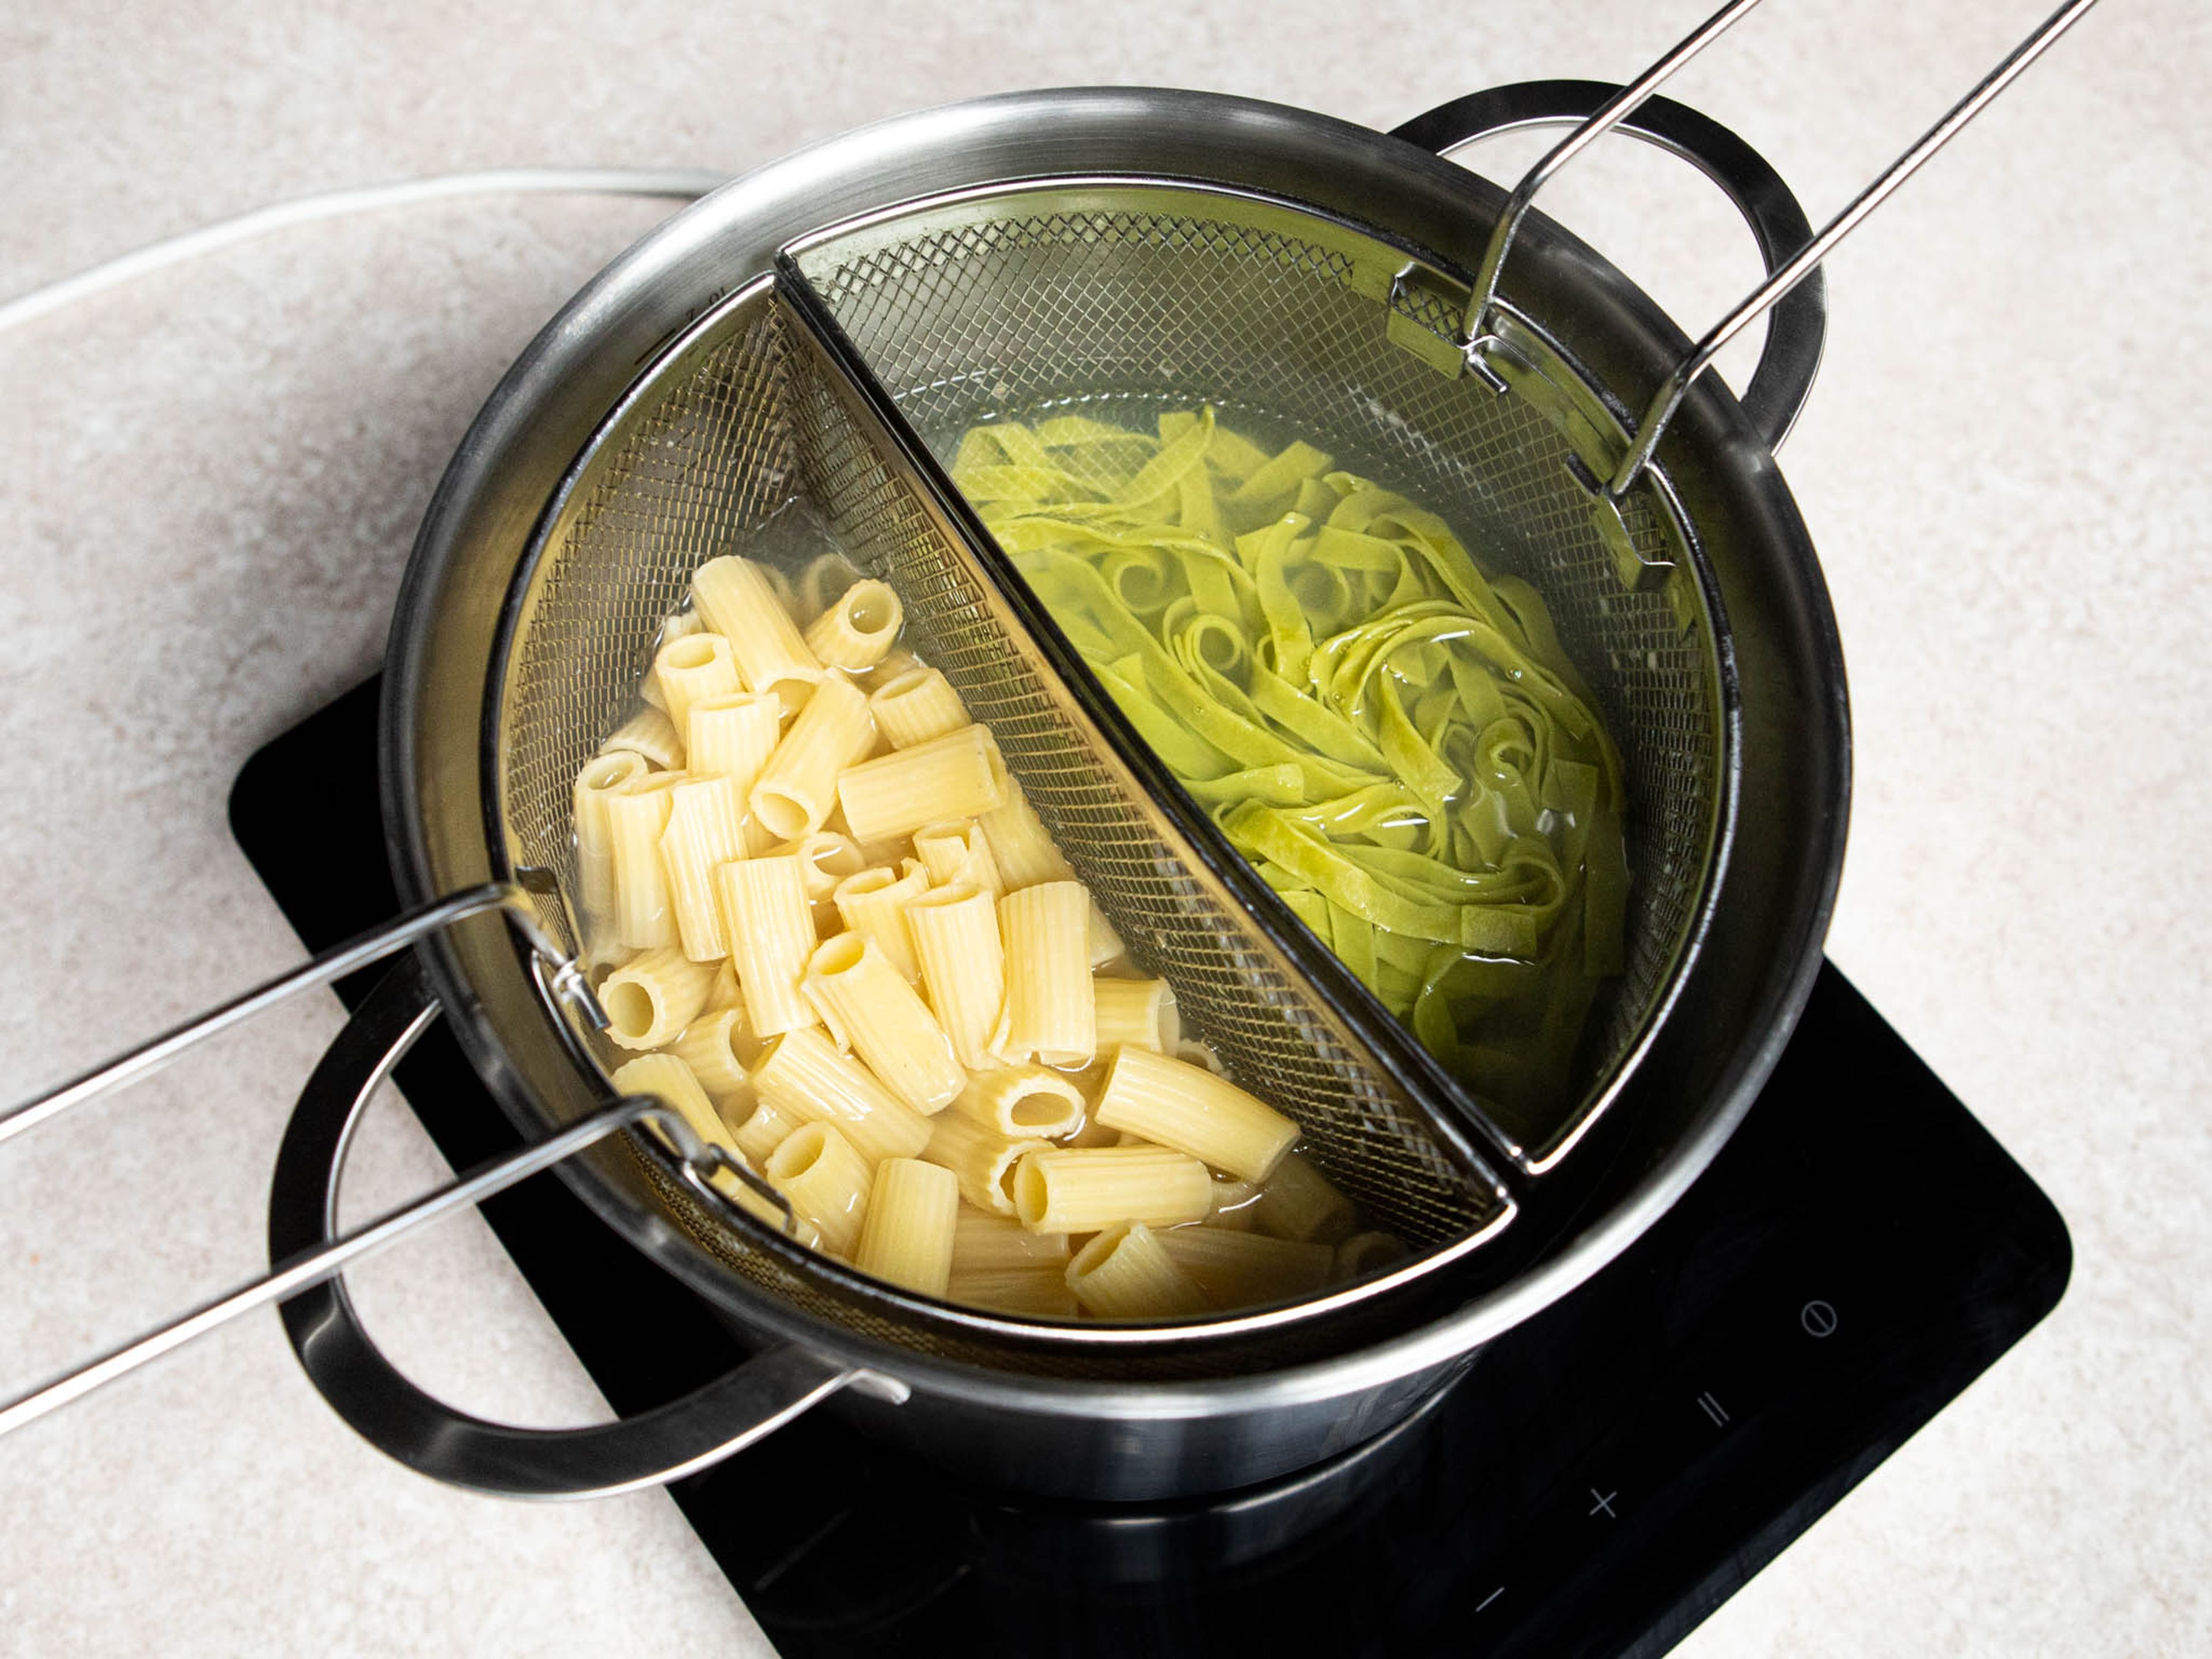 Bring a pot of salted water to a boil. Cook pasta until al dente, then drain, reserving some pasta water.